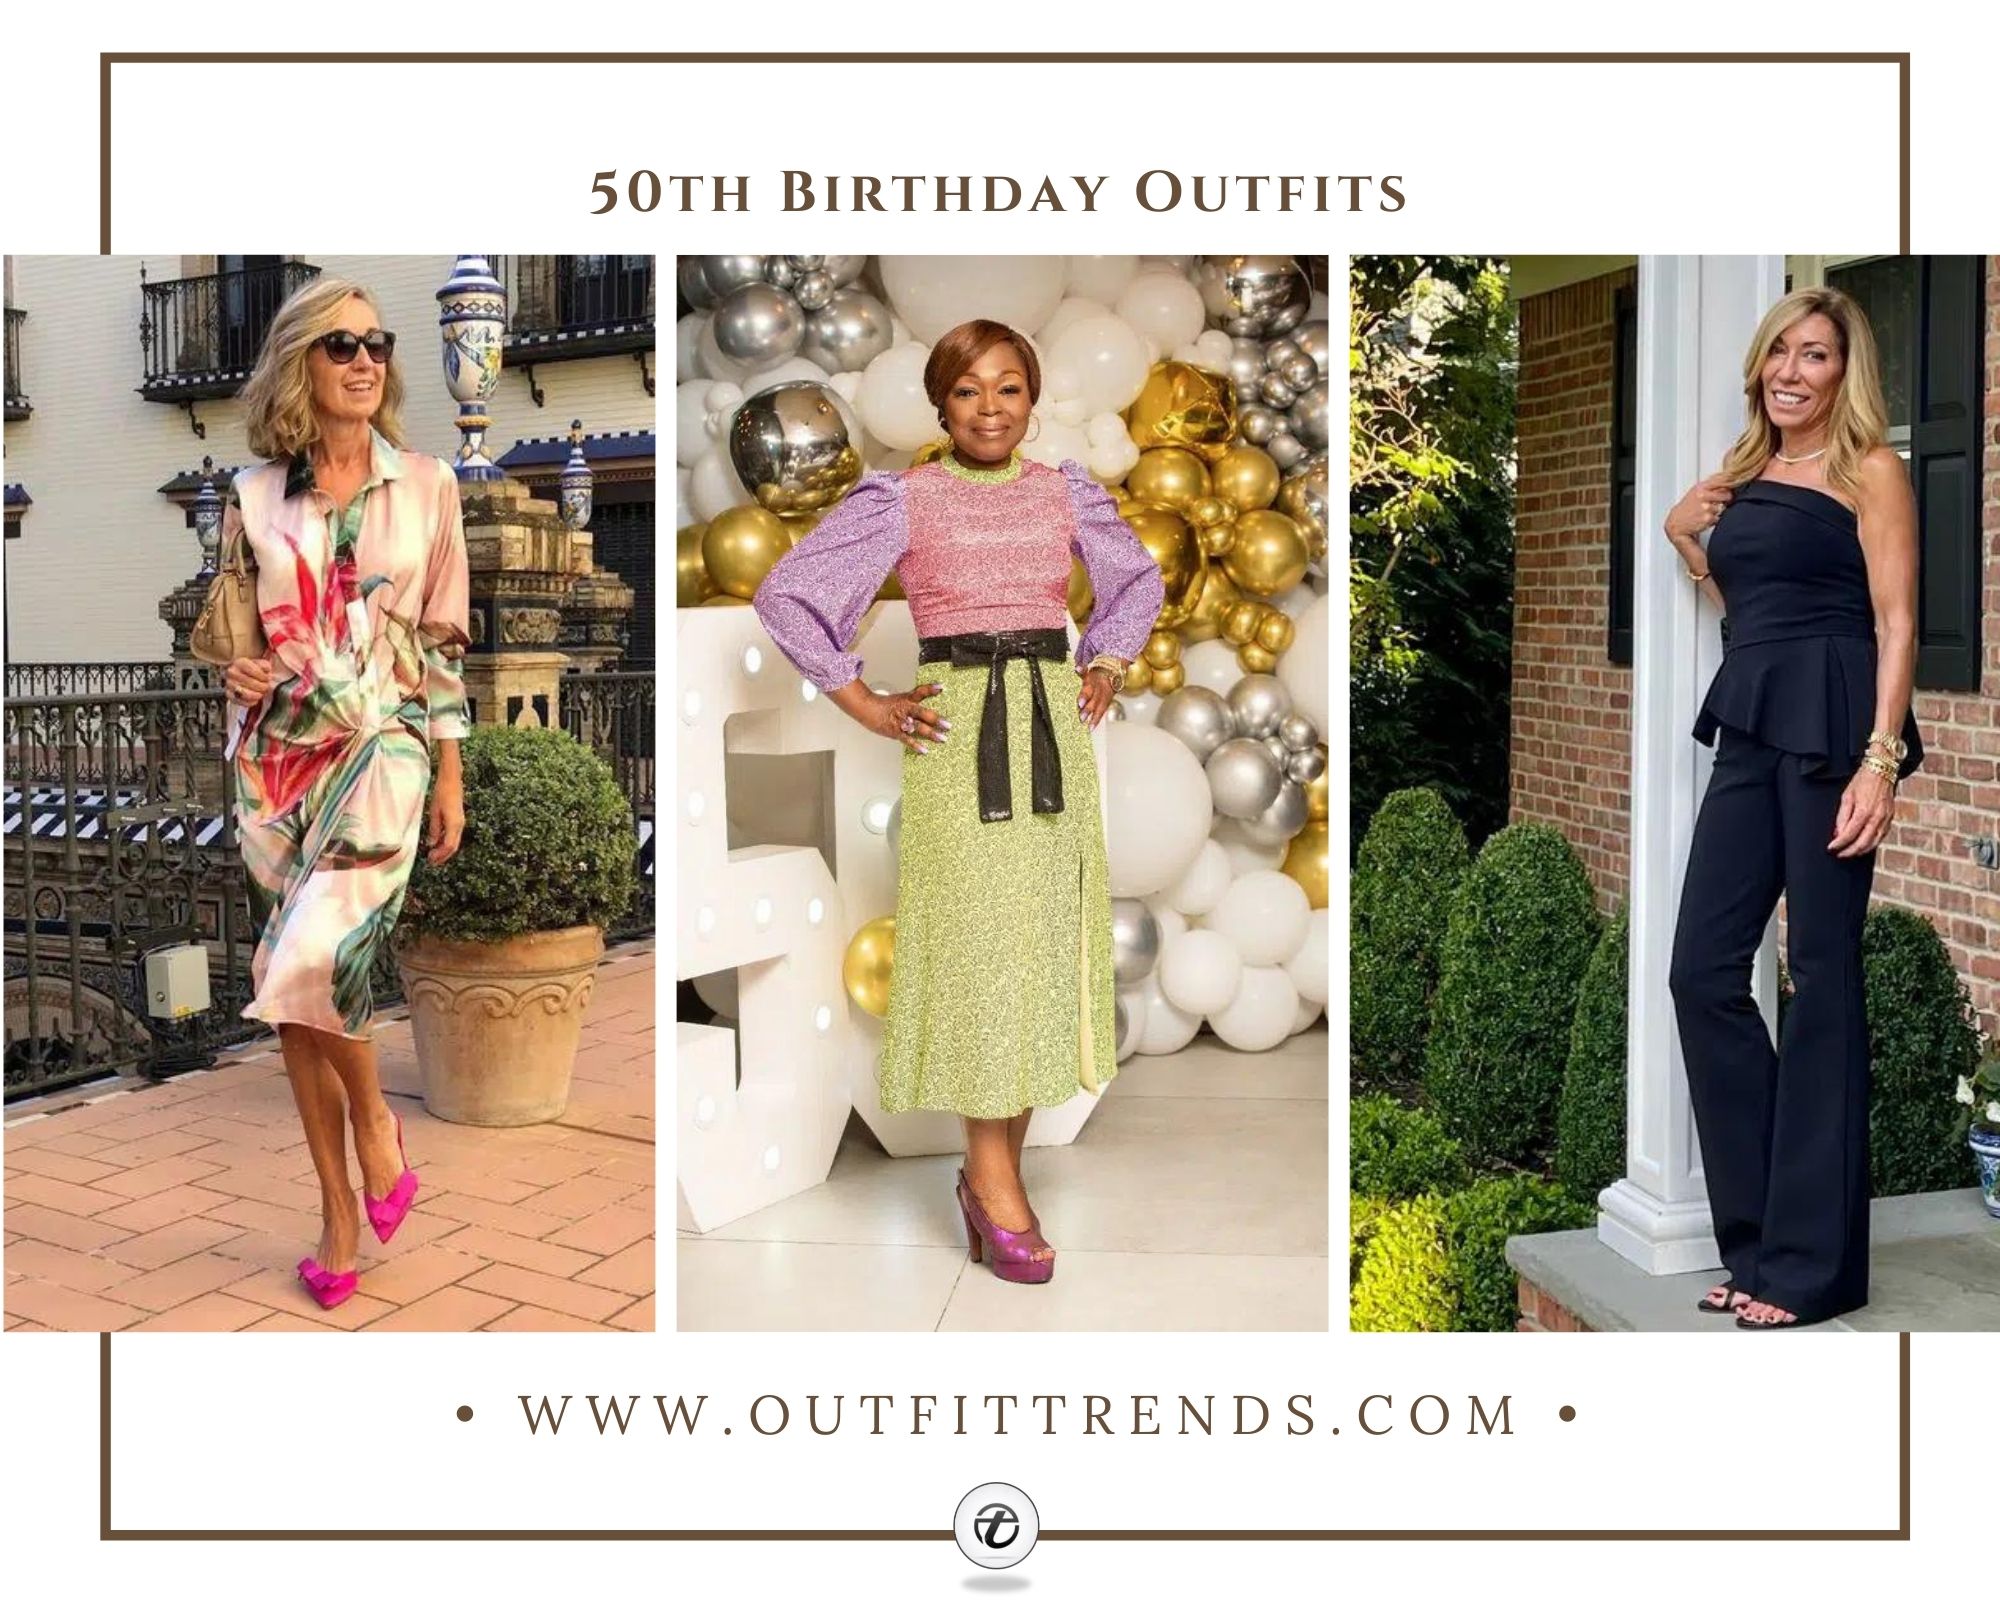 50th Birthday Outfits: 20 Dress Ideas ...